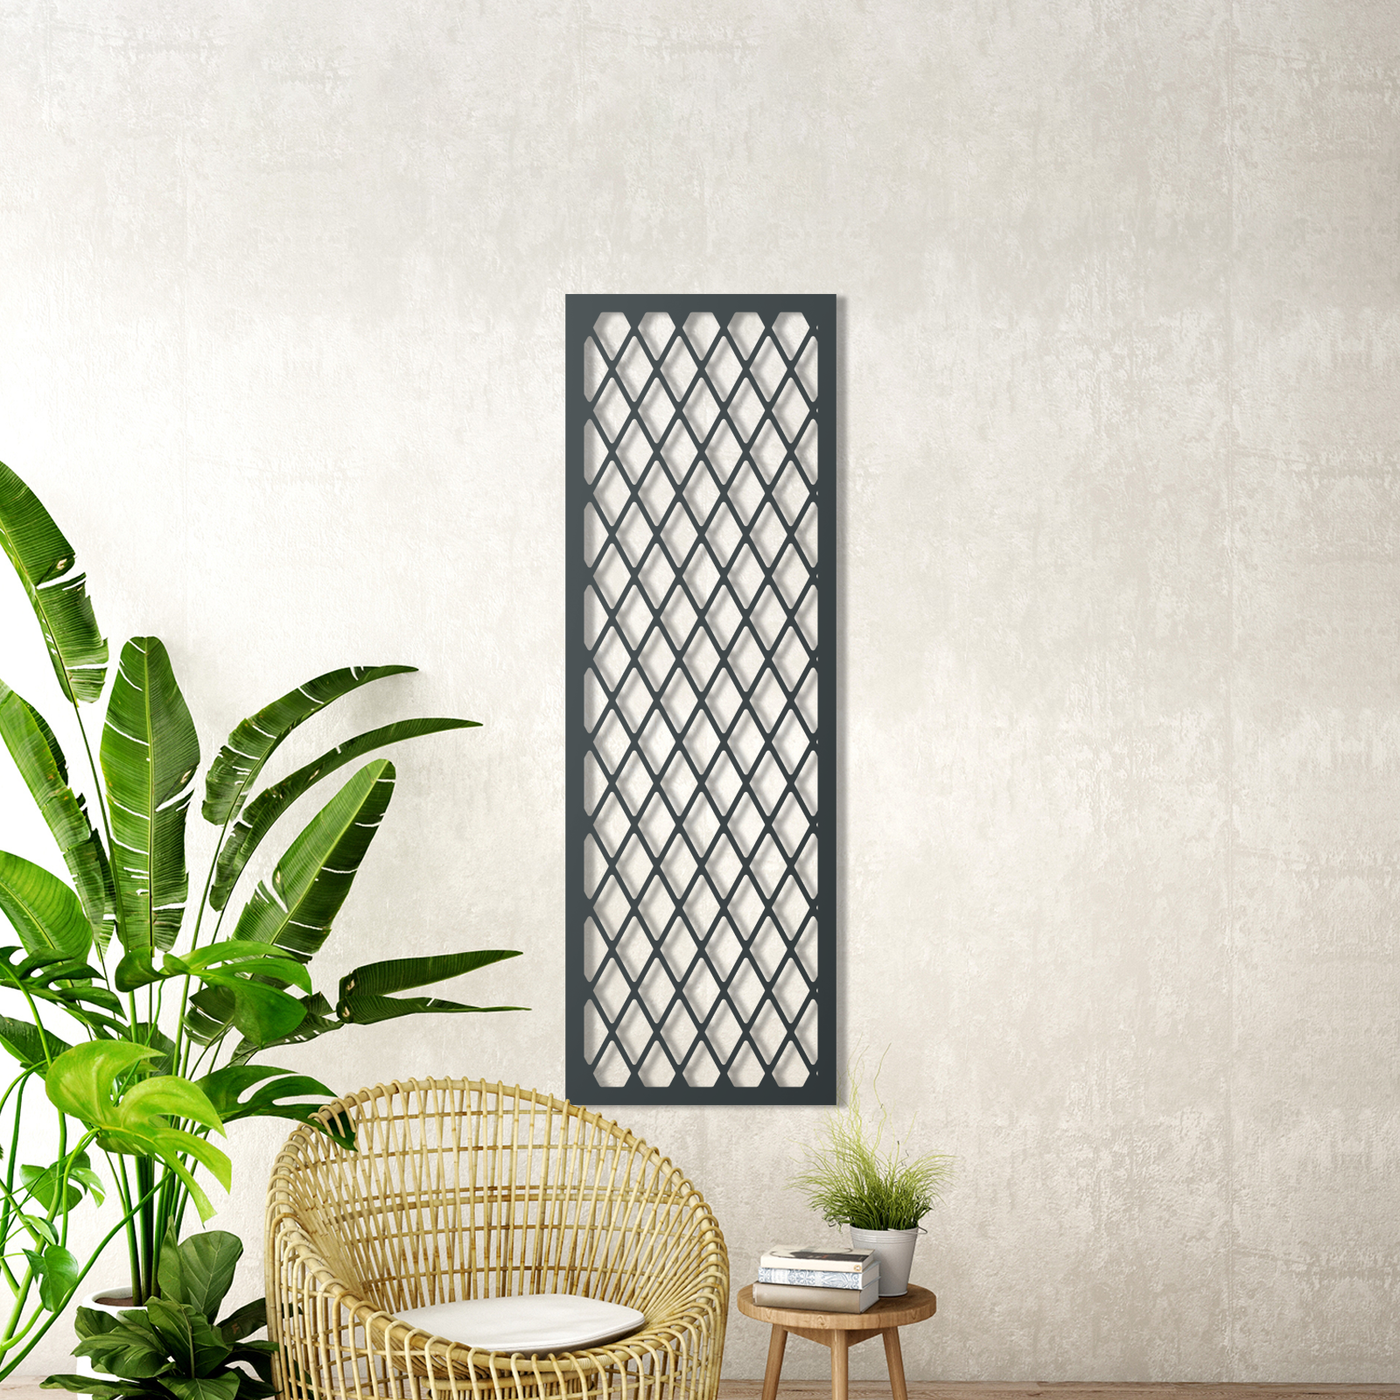 Cheesegrater Metal Garden Screen: A Great Way to Add Style and Privacy to Your Outdoor Space